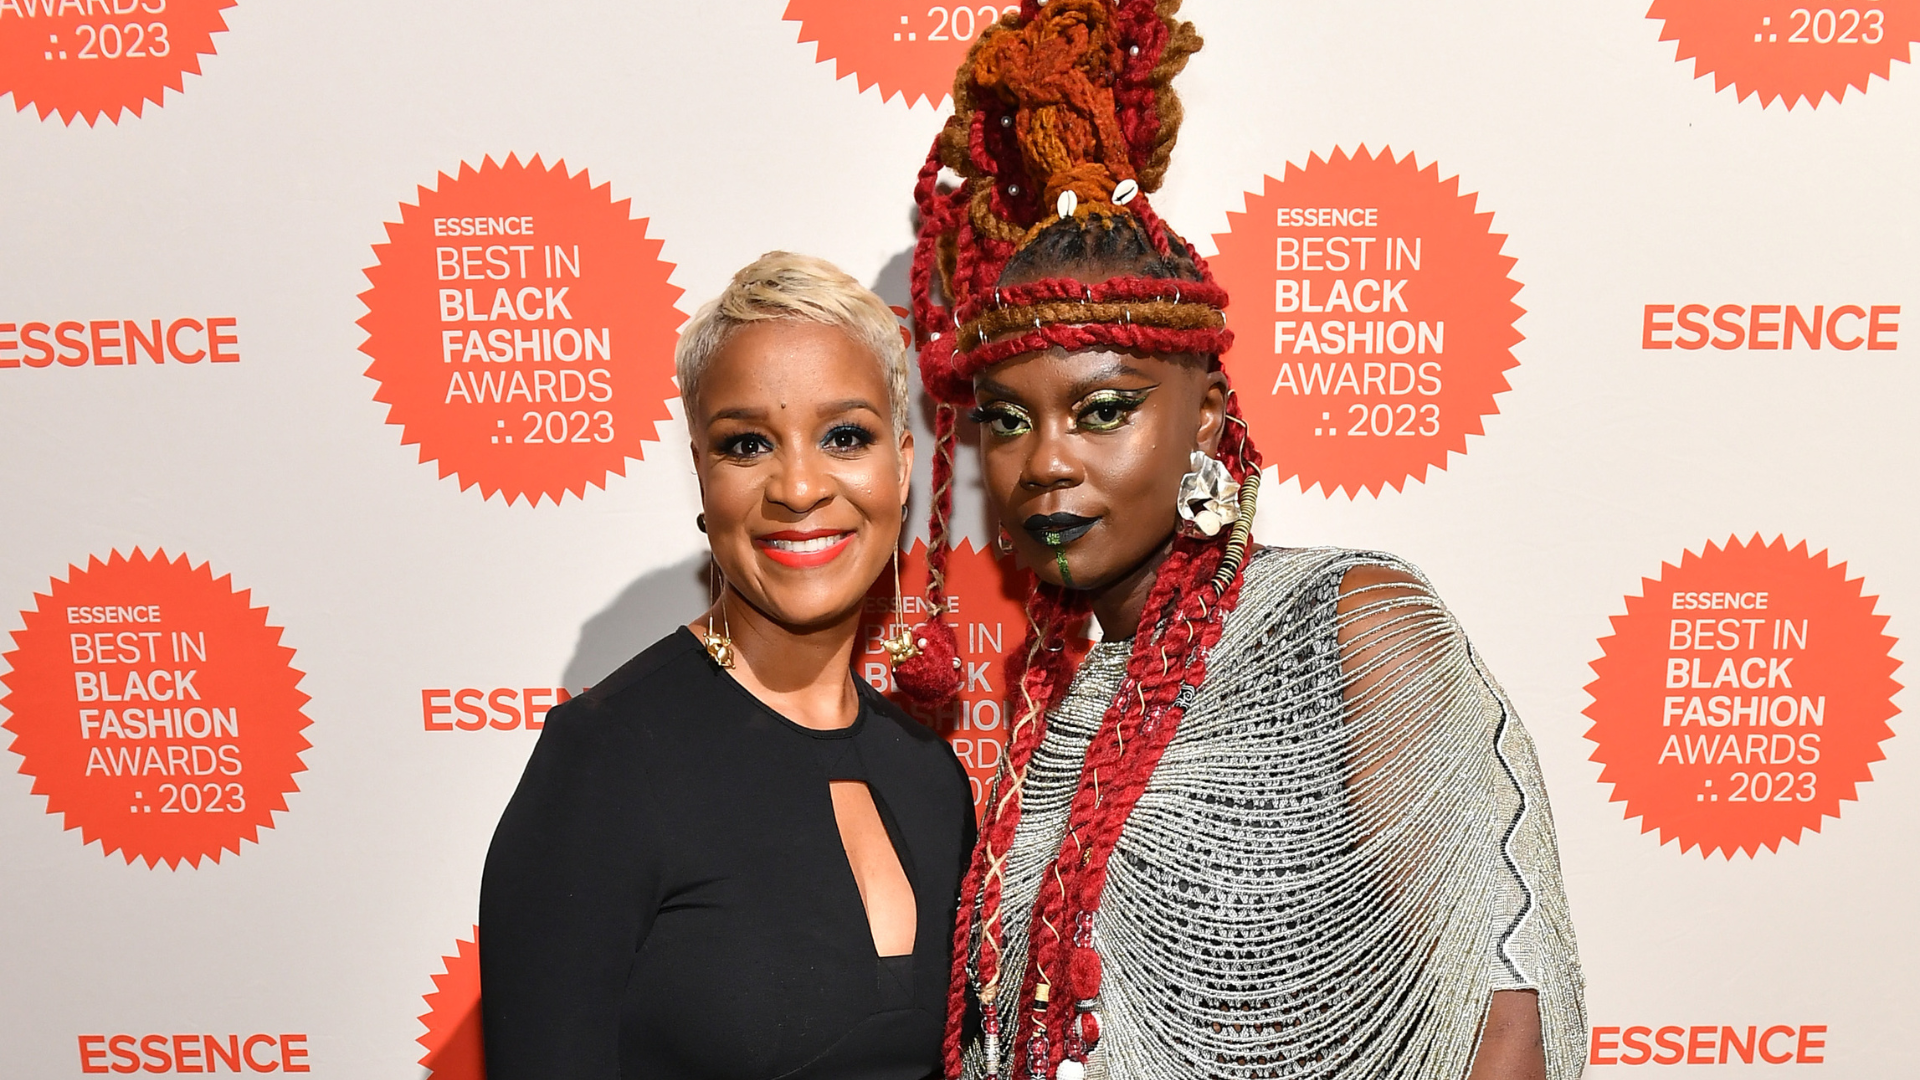 Brandice Daniel Wins Impact Award Of The Year At ESSENCE's Best In Black Fashion Awards